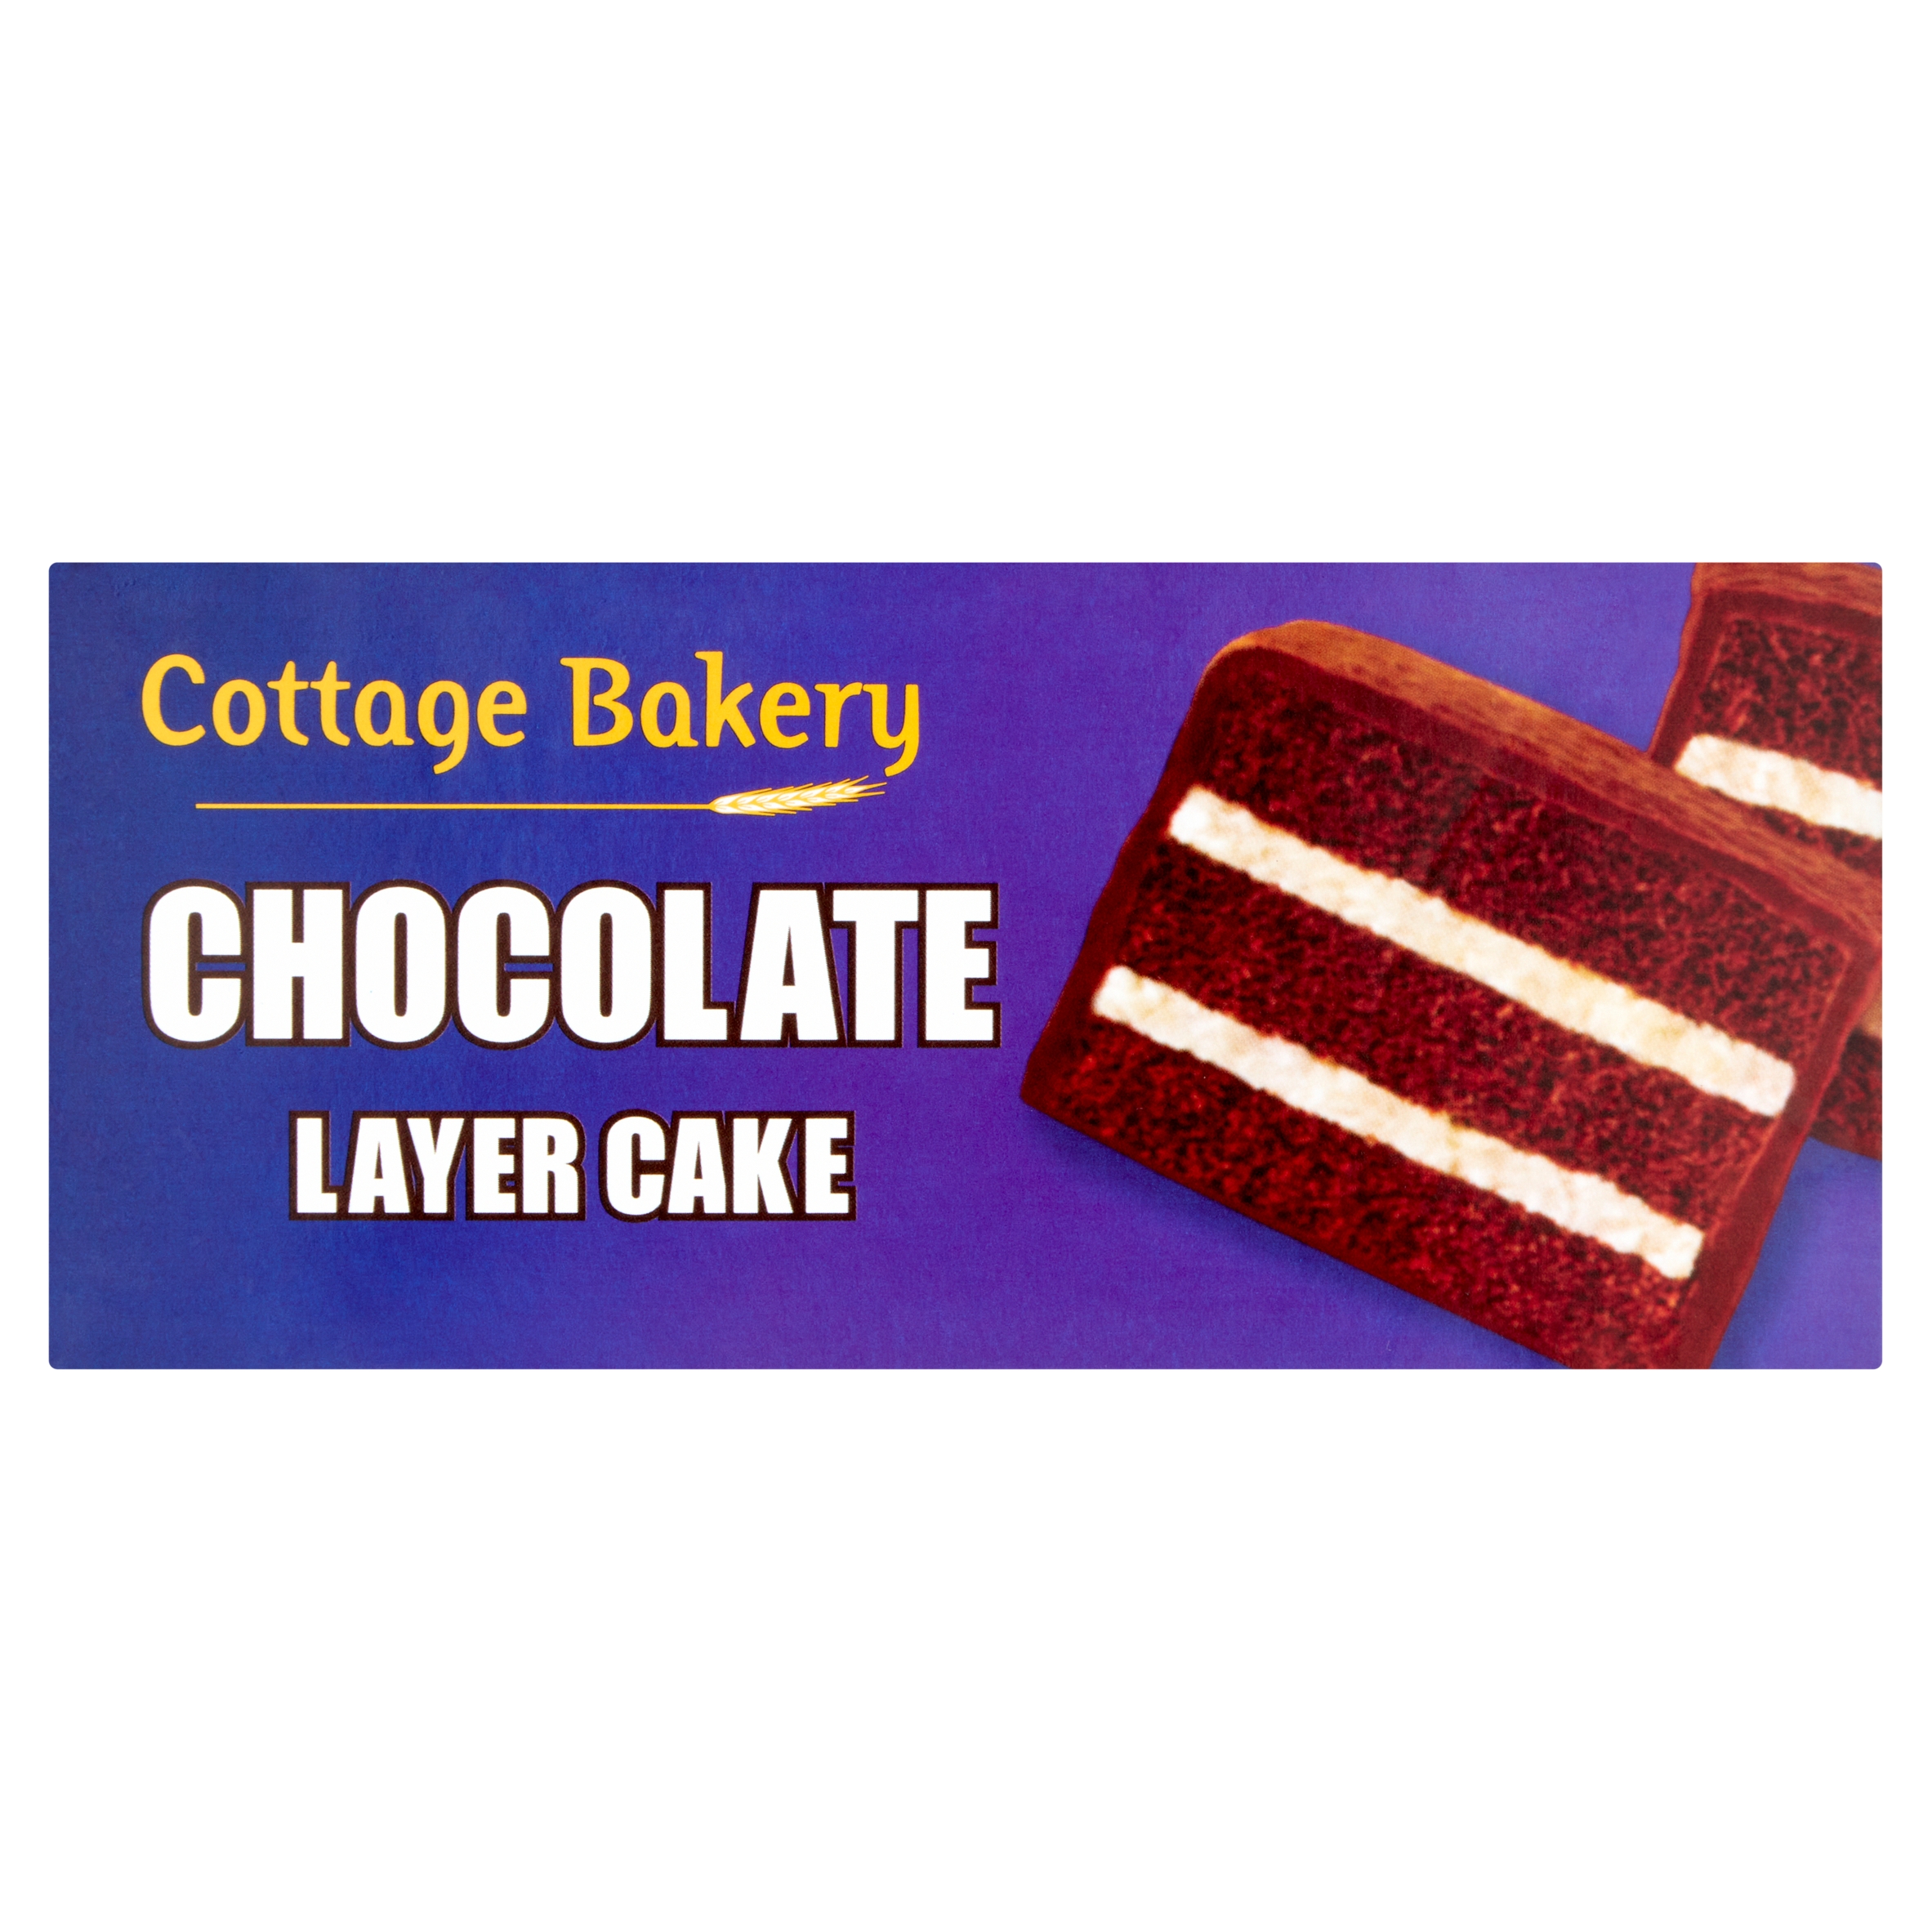 Cottage Bakery Chocolate Layer Cake (Feb - Nov 23) 150g RRP £1.49 CLEARANCE XL 89p or 2 for £1.50